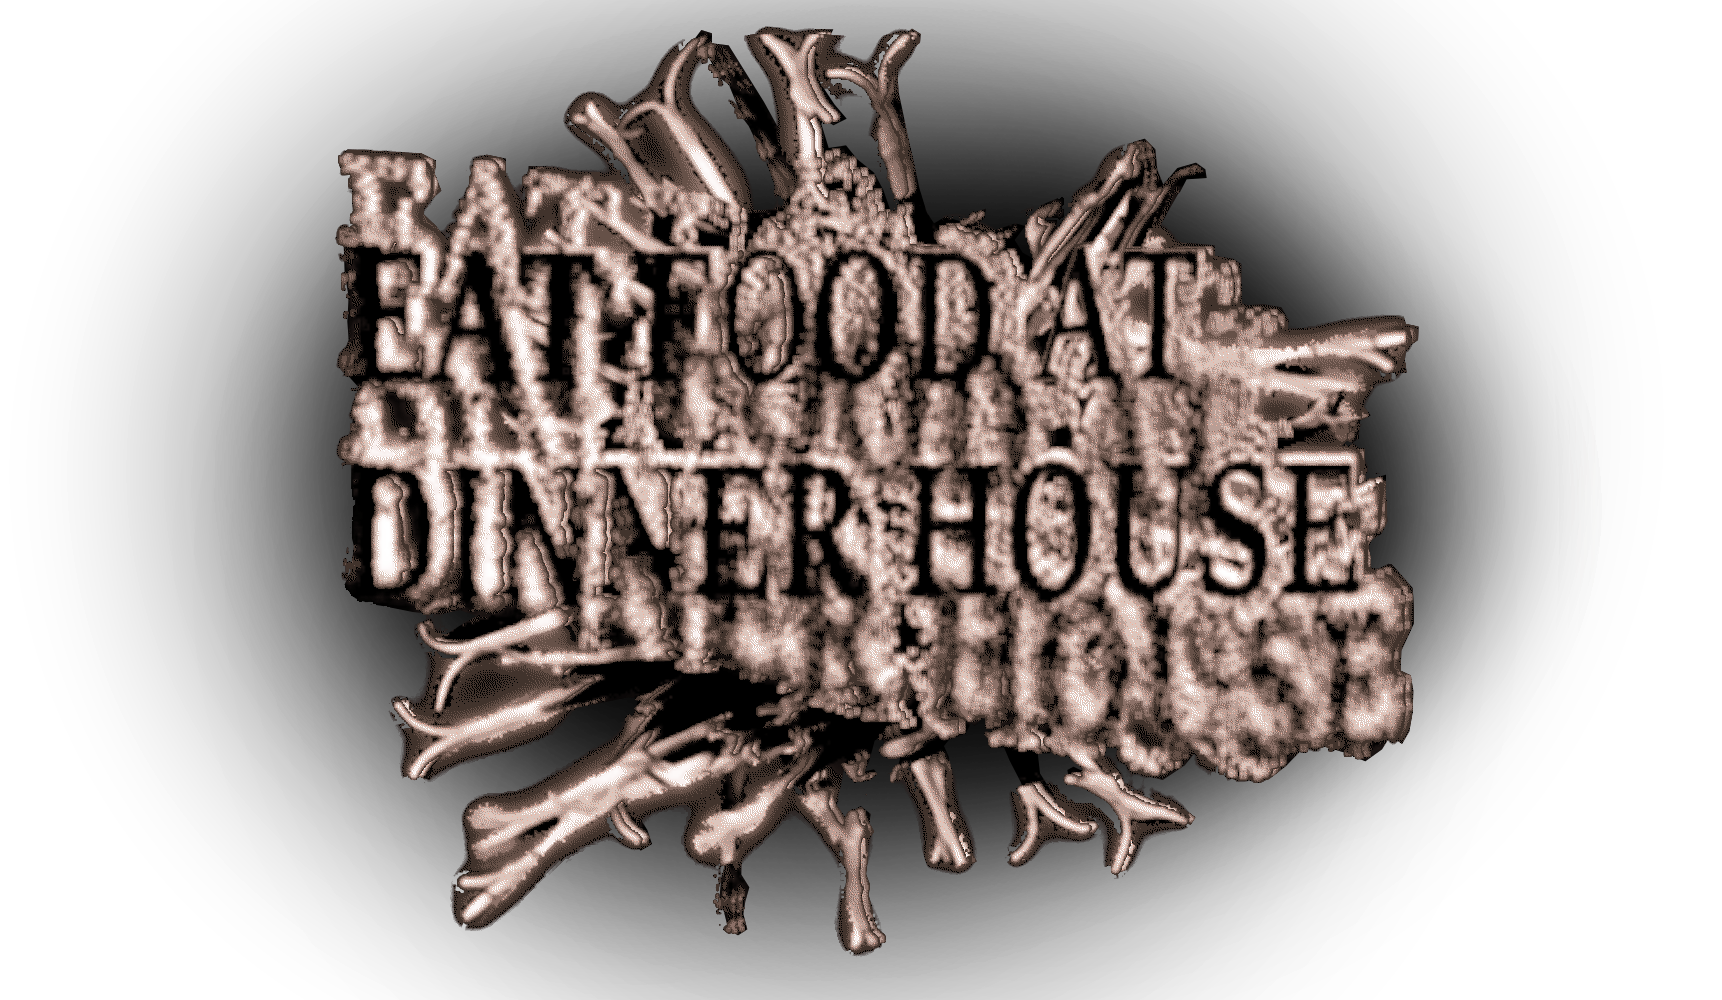 EAT FOOD AT DINNER HOUSE